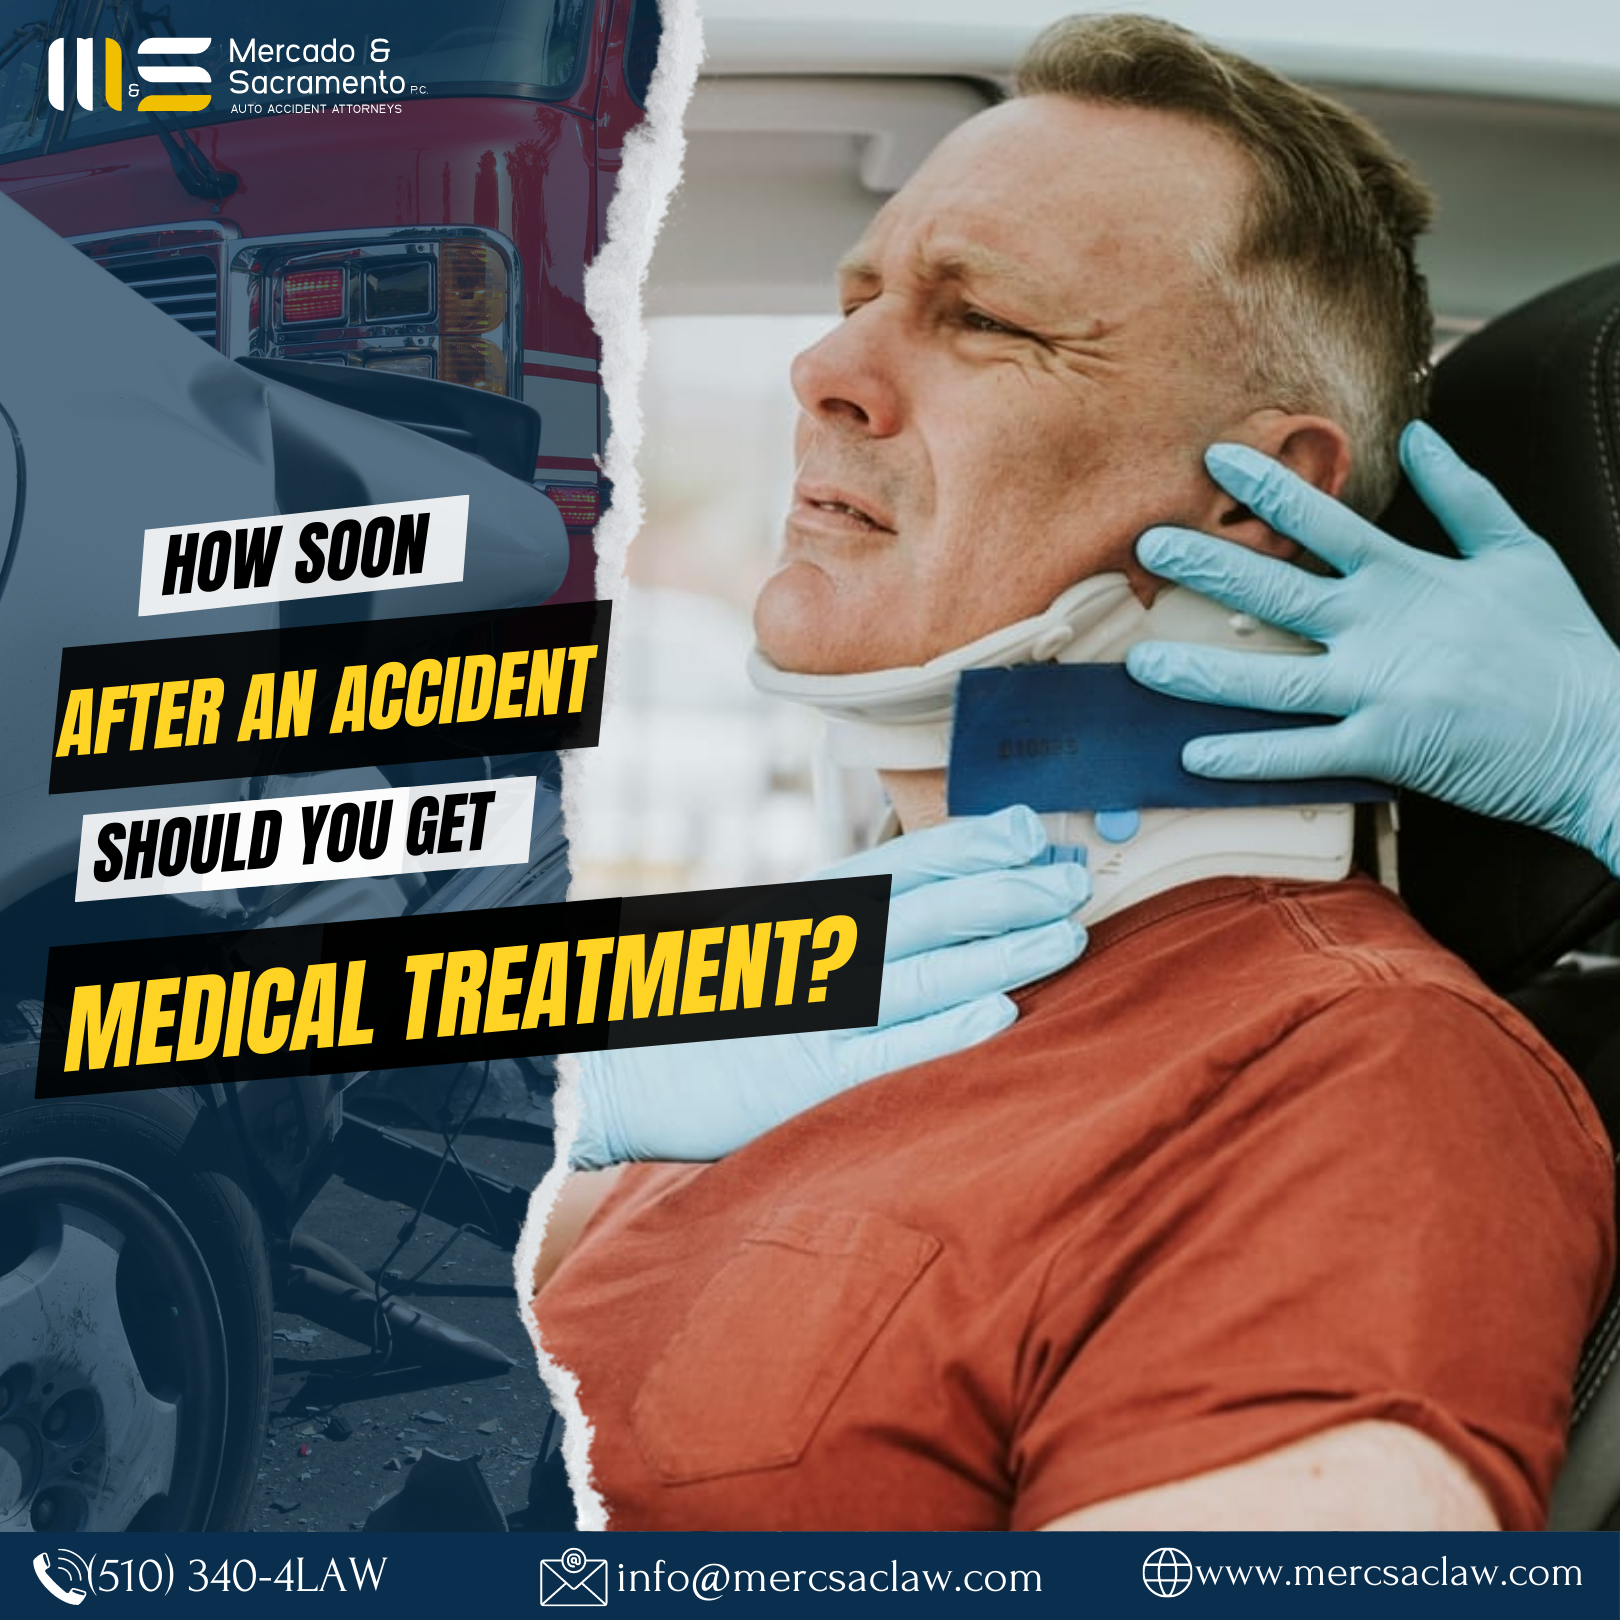 How Soon After An Accident Should You Get Medical Treatment?